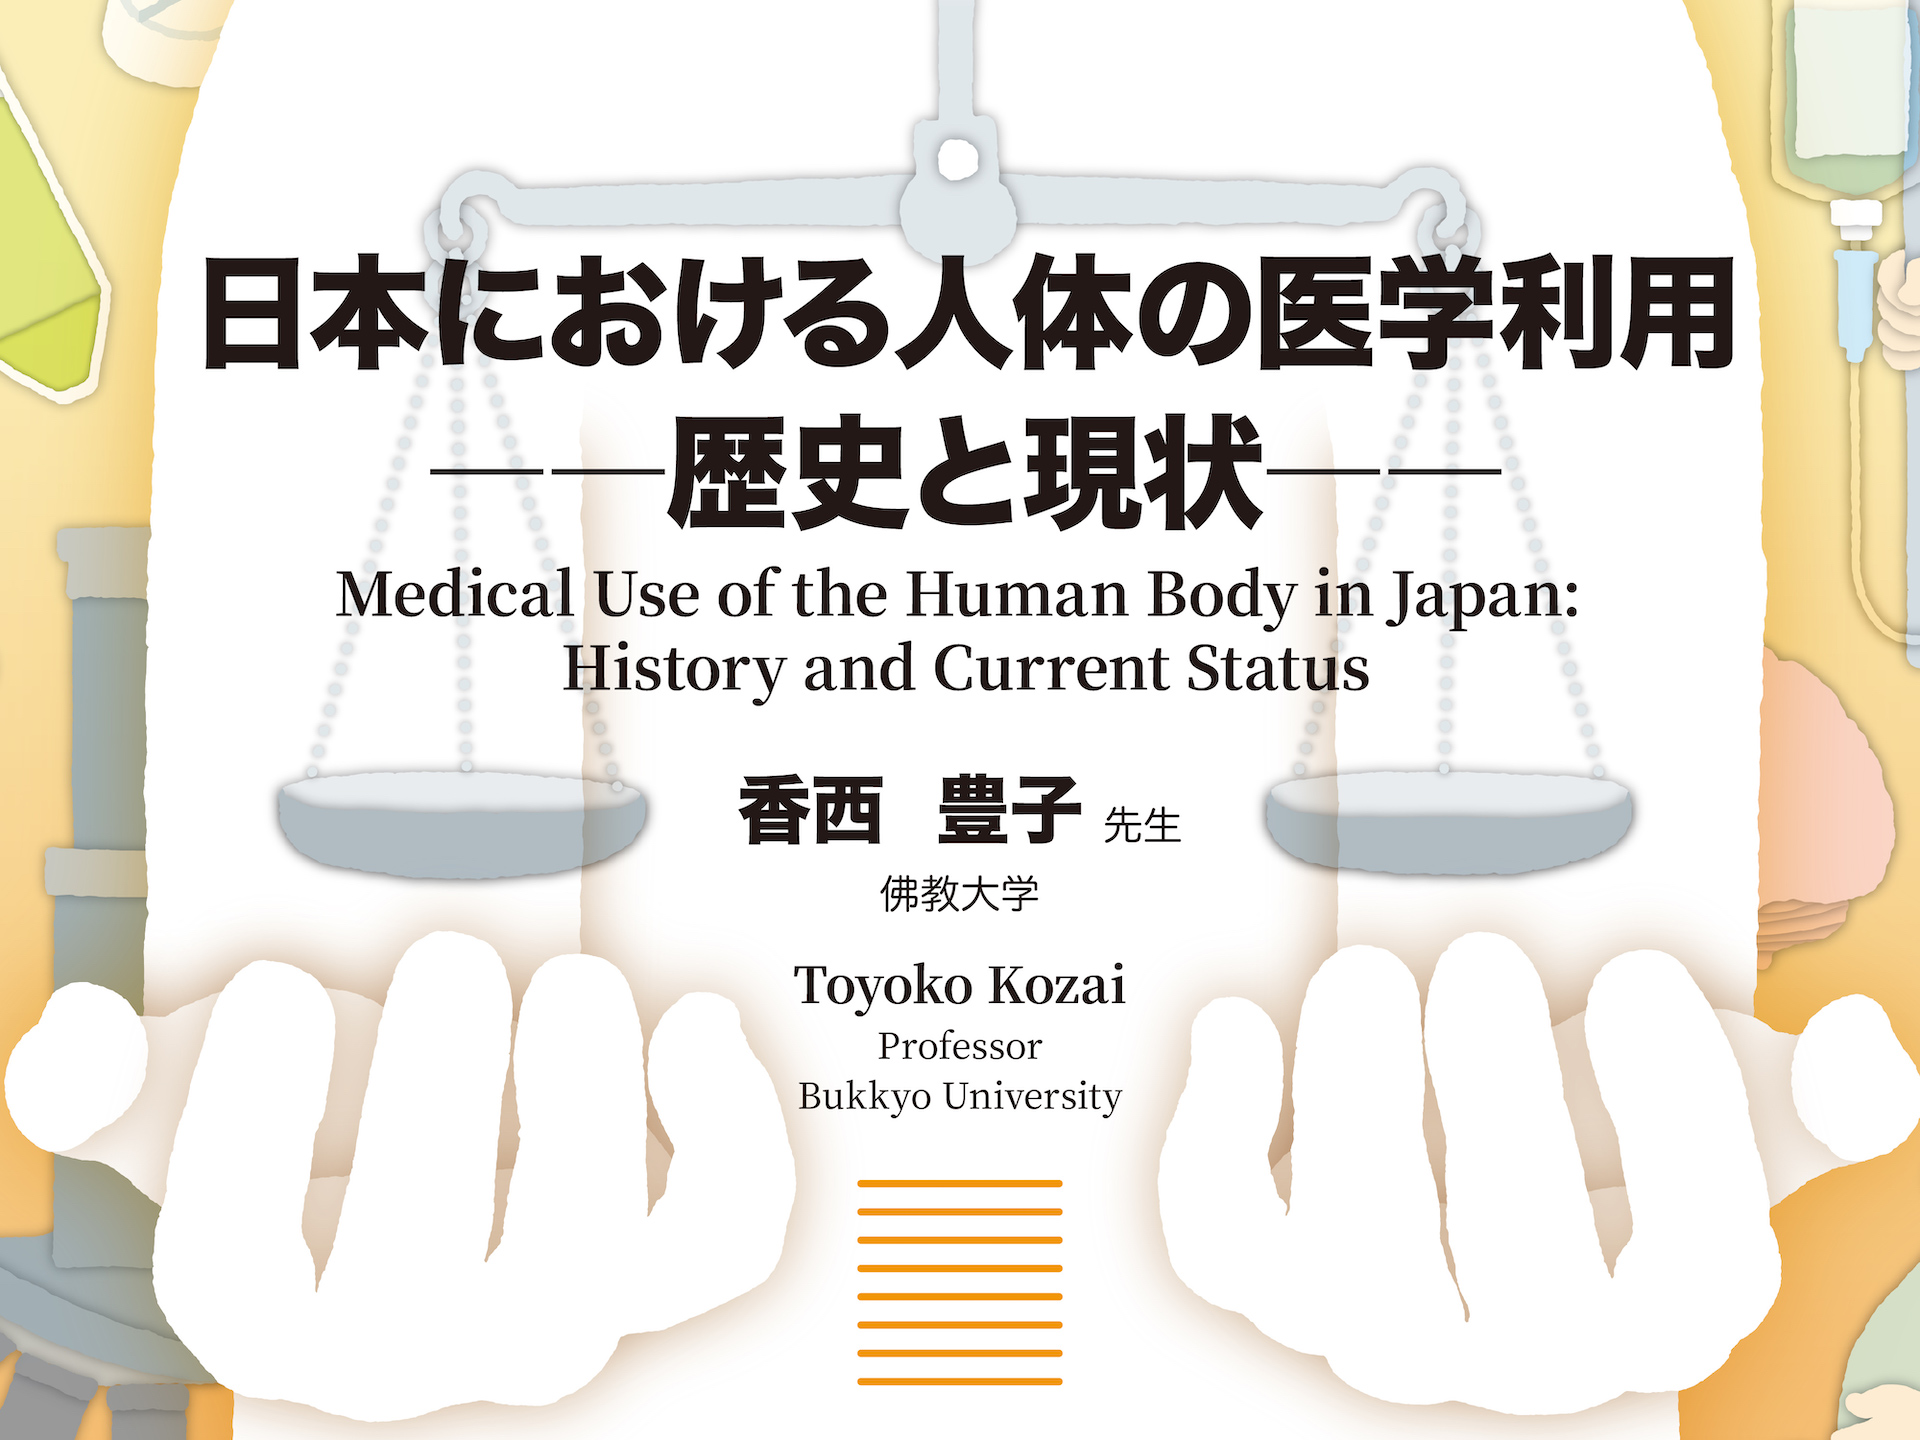 ASHBi–CiRA Bioethics Lecture: Medical Use of the Human Body in Japan –  History and Current Status